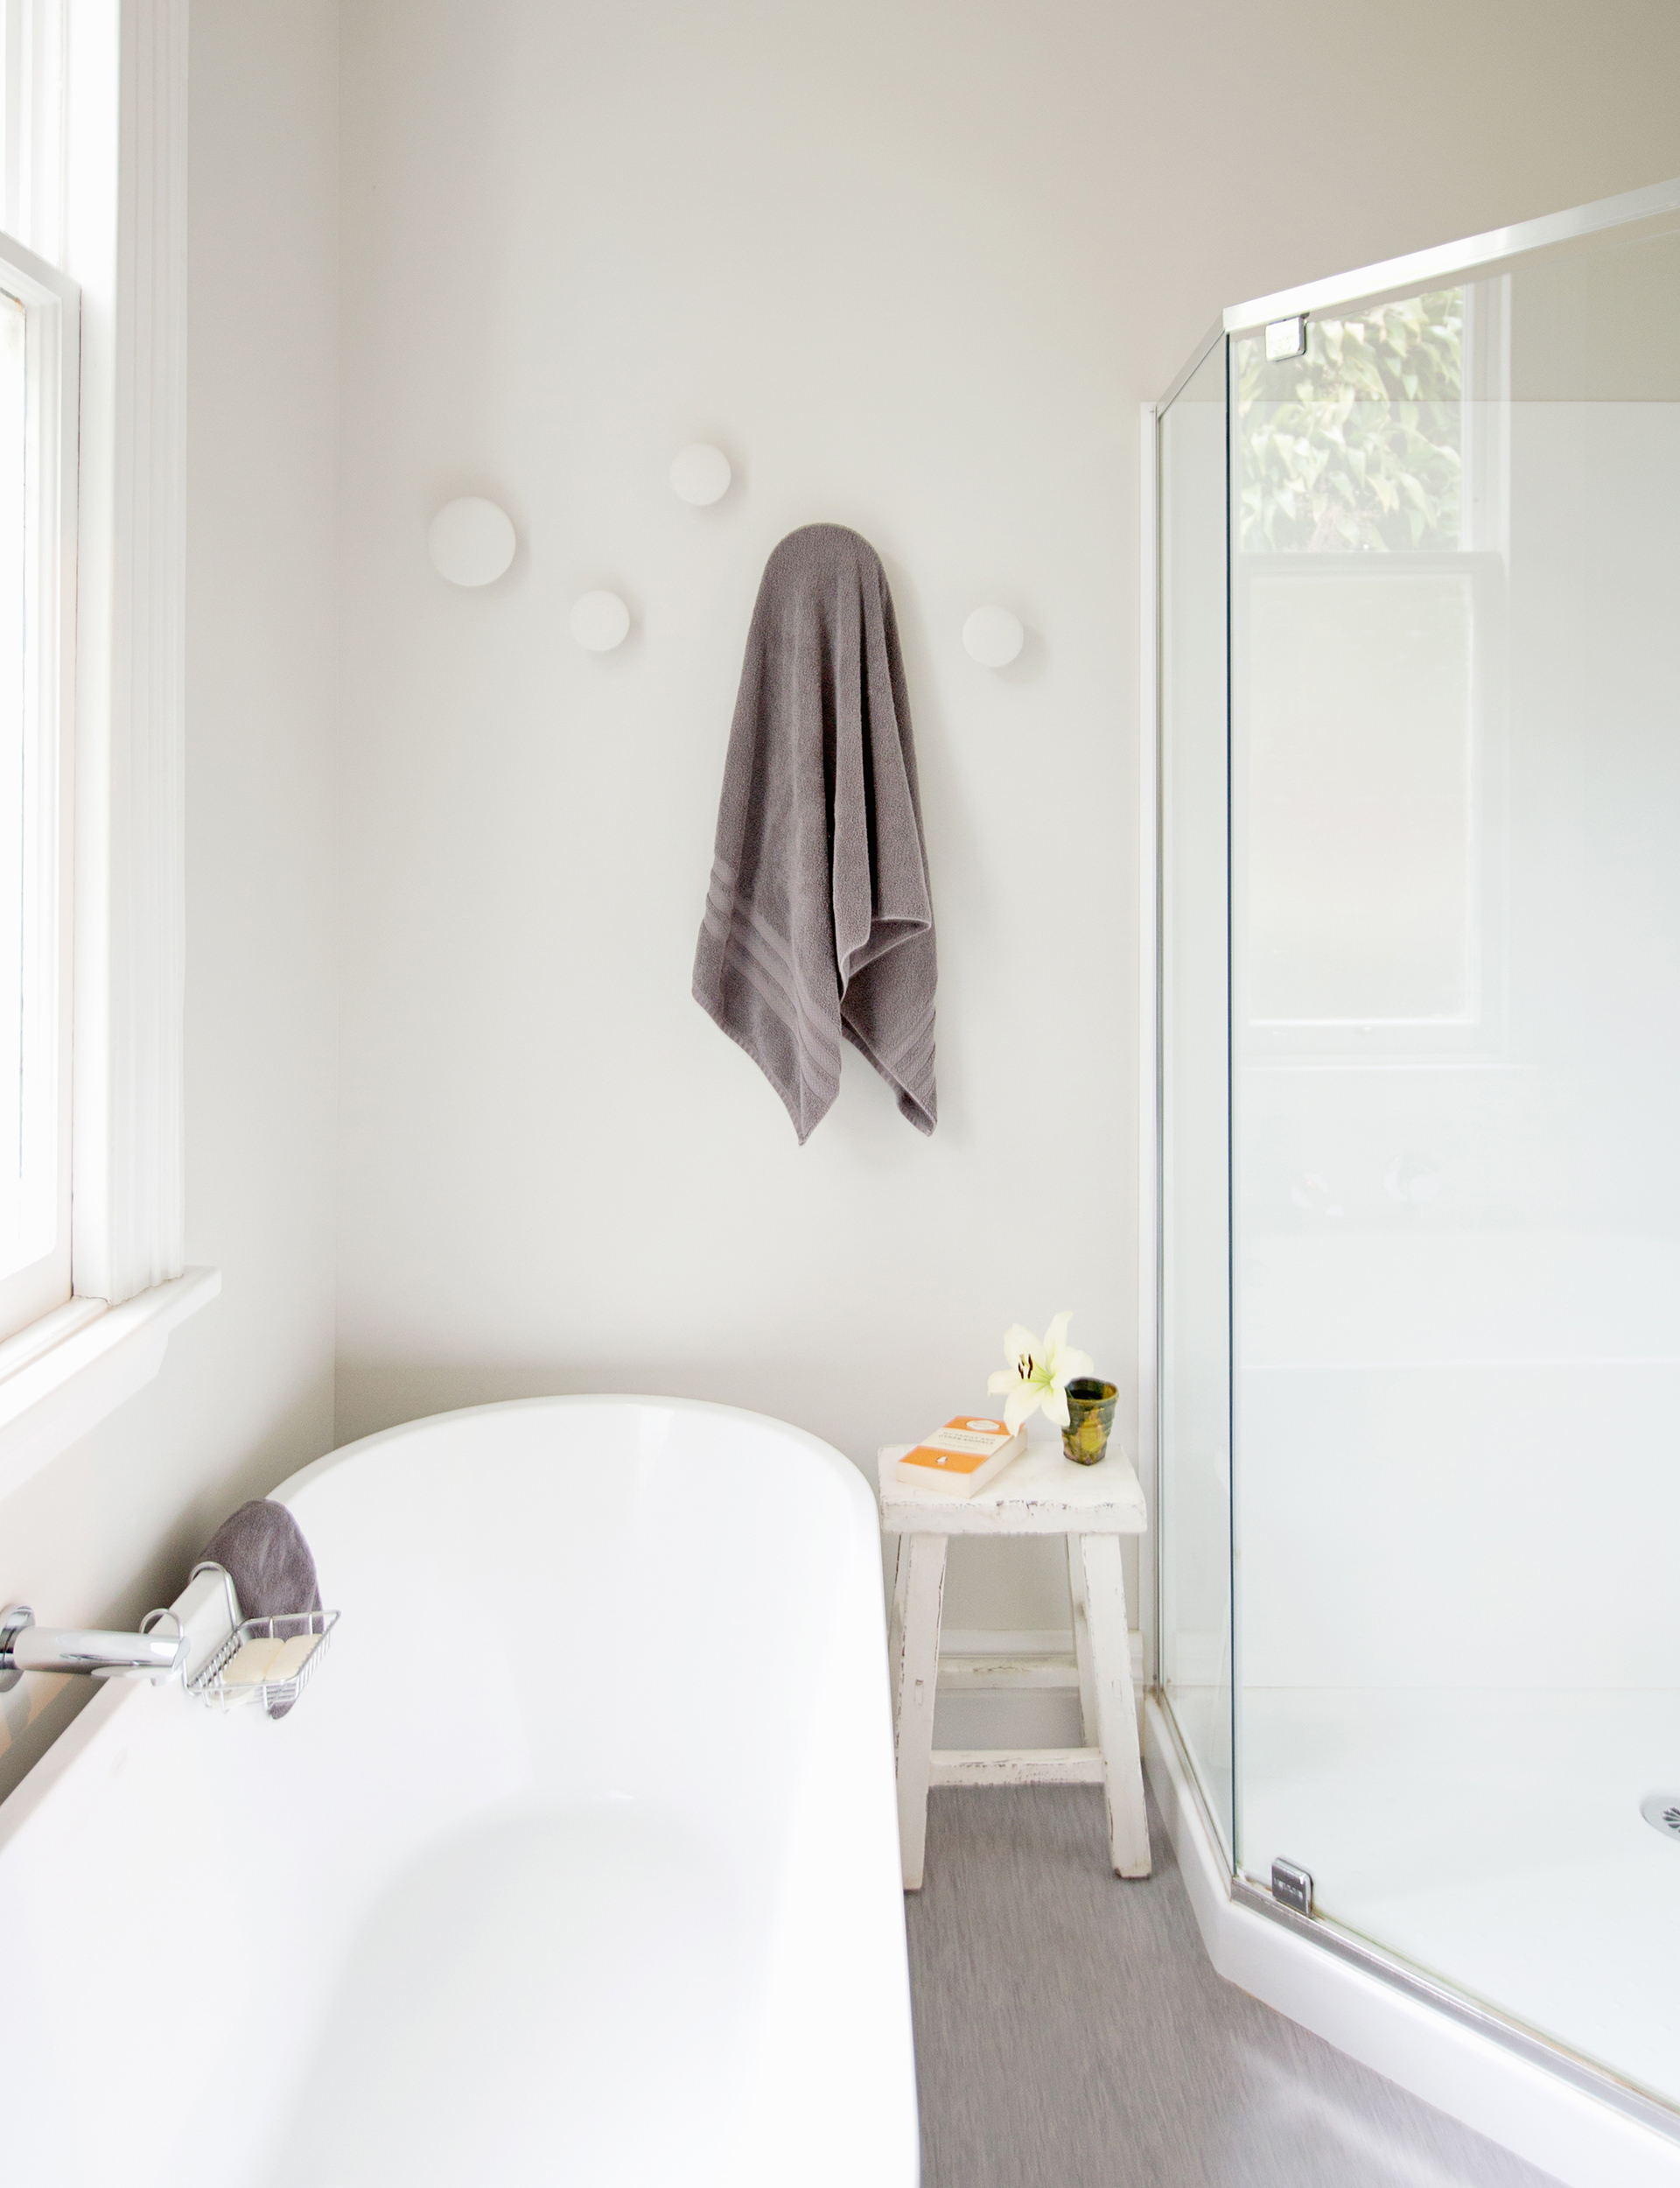 In the family bathroom white Muuto ‘Dots’ (handy for hanging towels) soften the look.